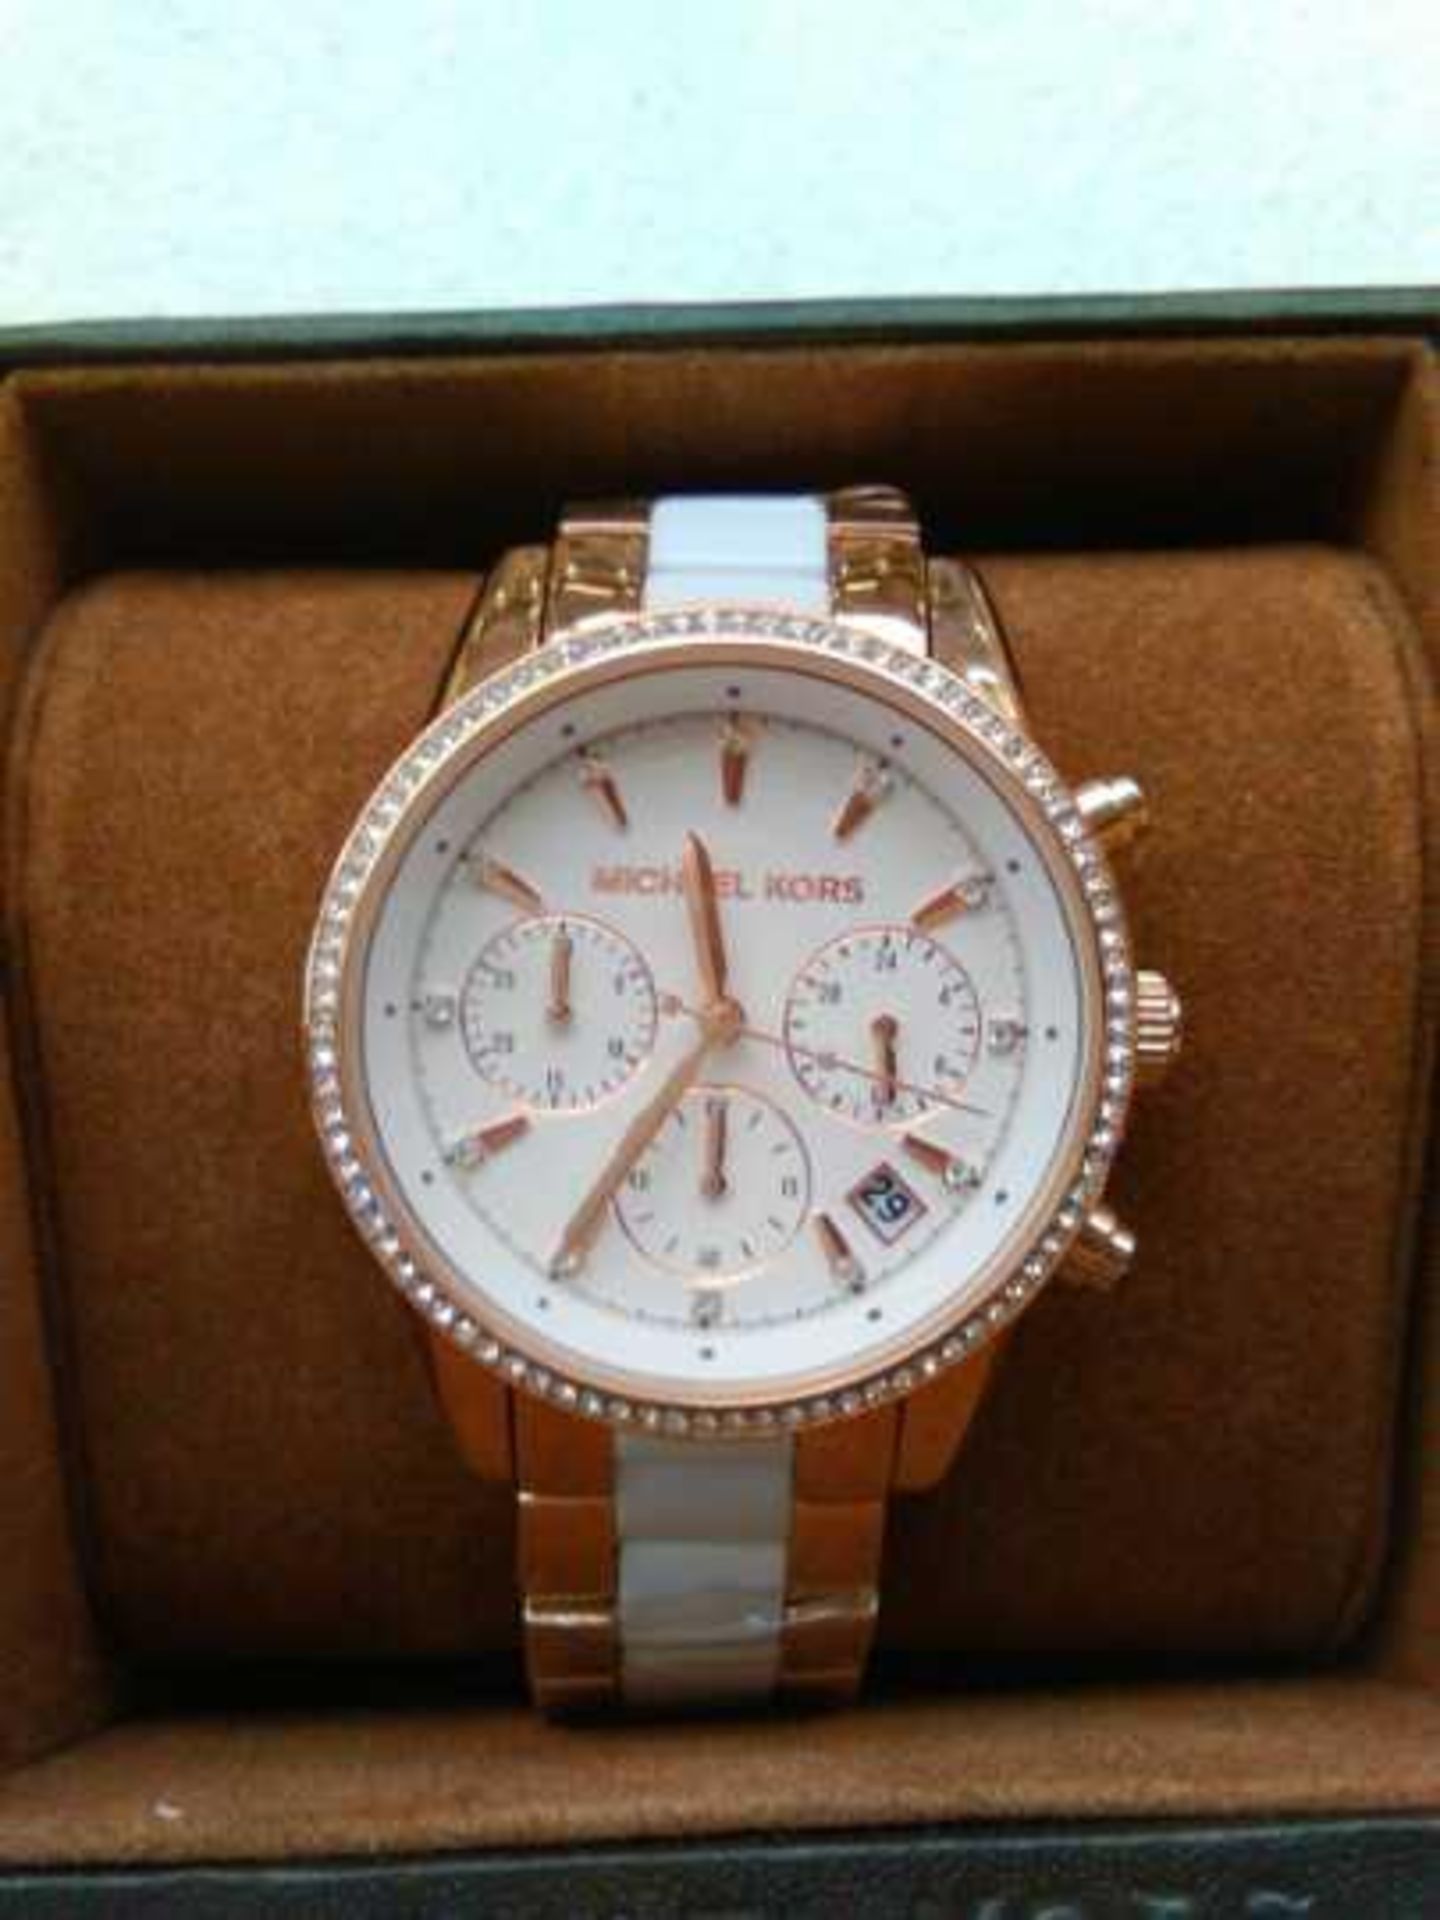 Michael Kors MK6324 ladies watch, new and ticking in presentation box.